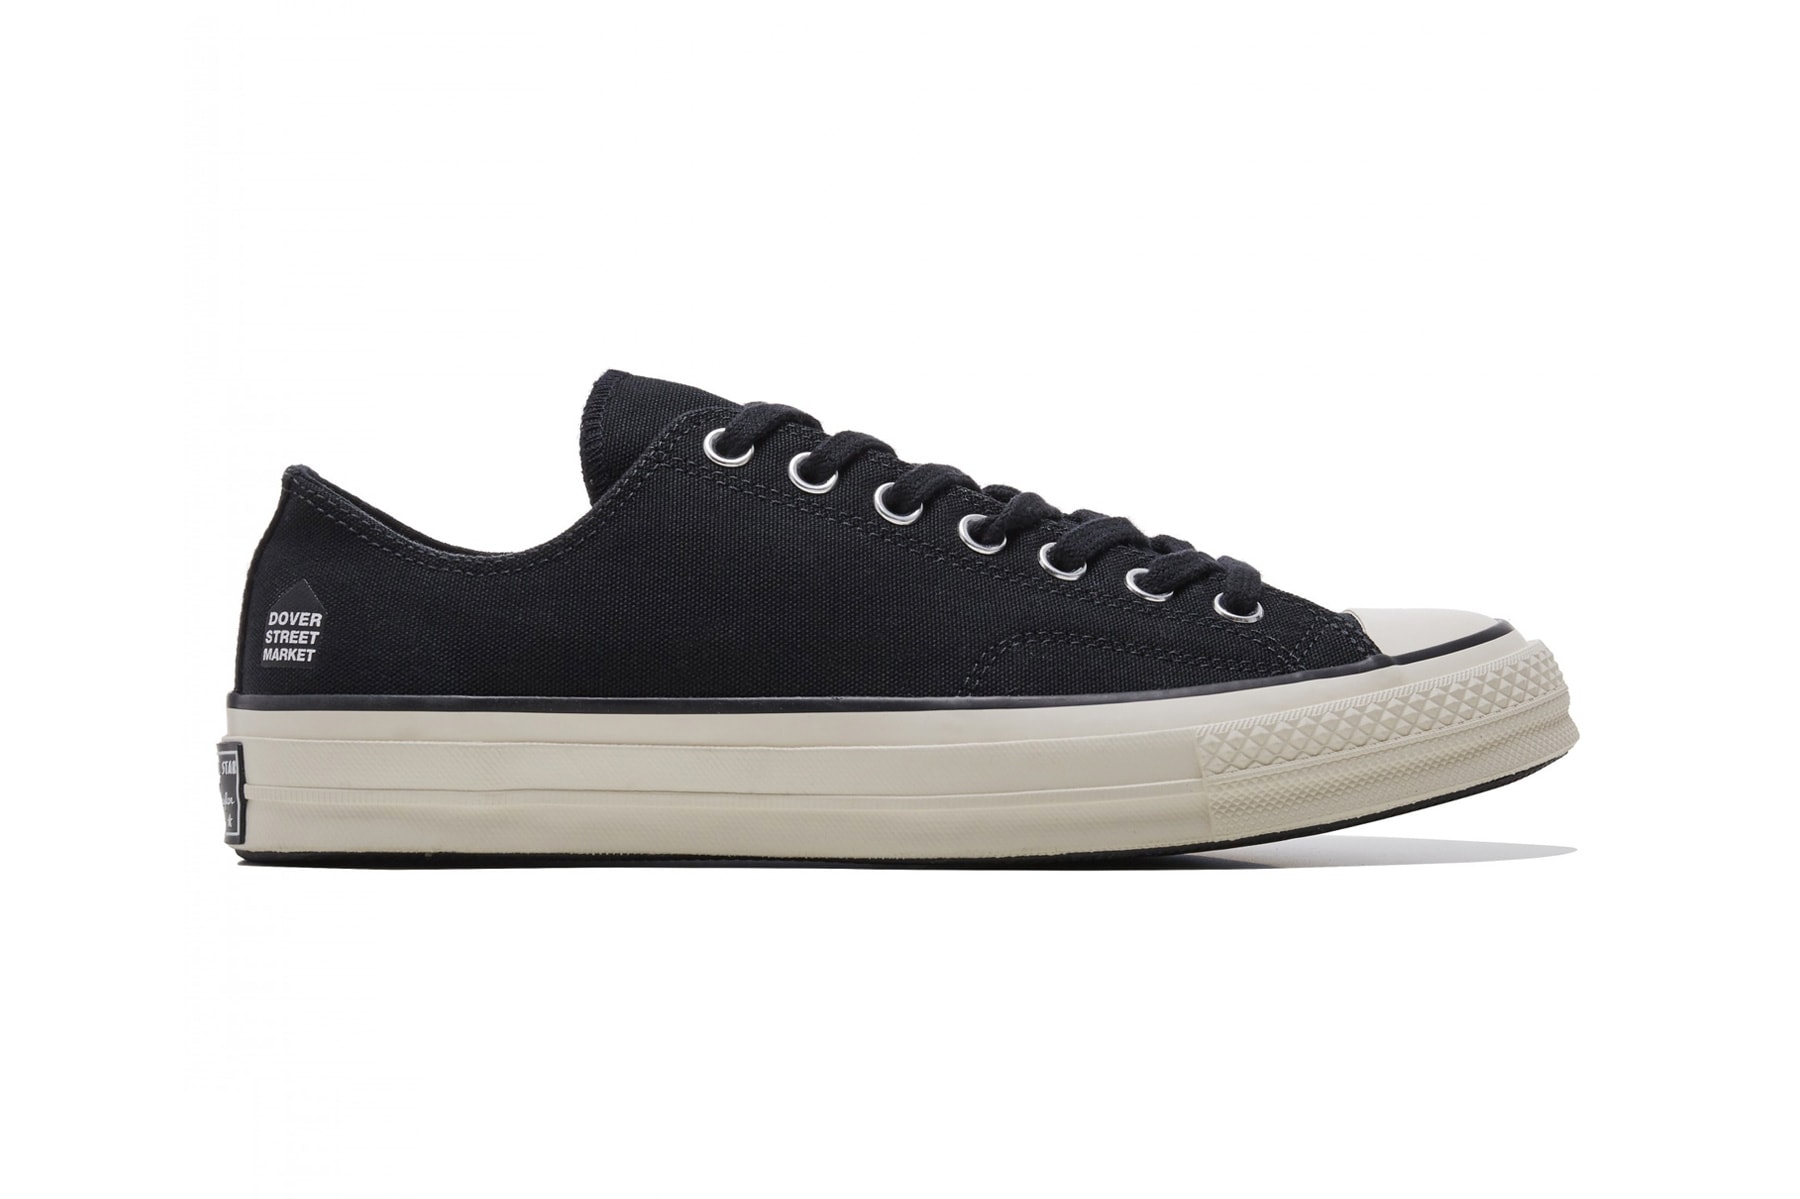 DSM Converse Chuck Taylor All Star '70 Ox dover street market london singapore white black sneaker colorway release date price info online purchase